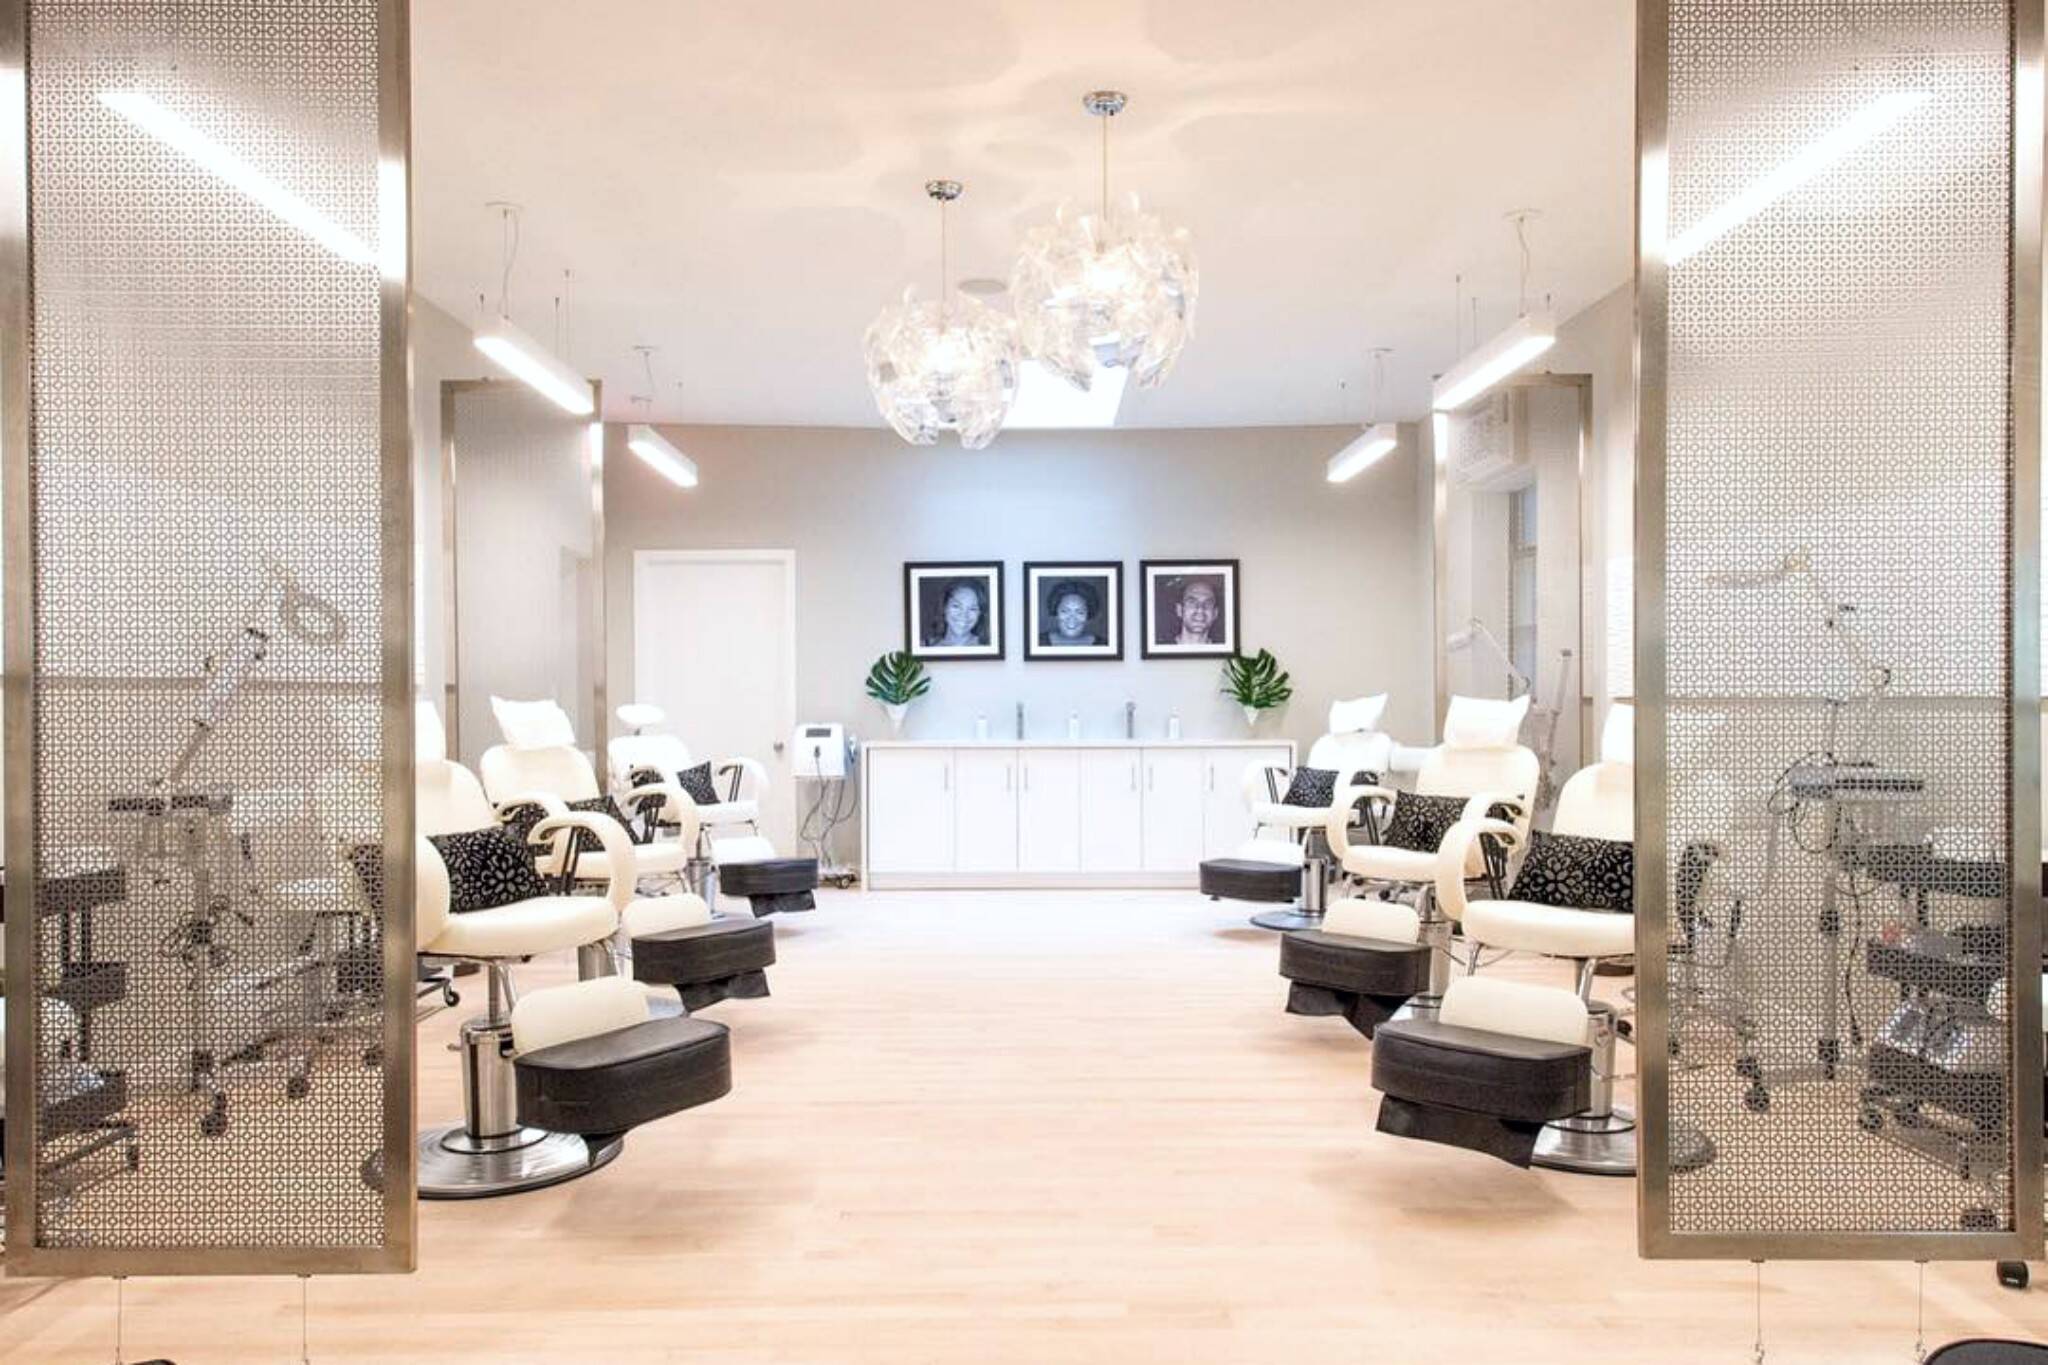 The Best Spa To Get A Facial In Toronto